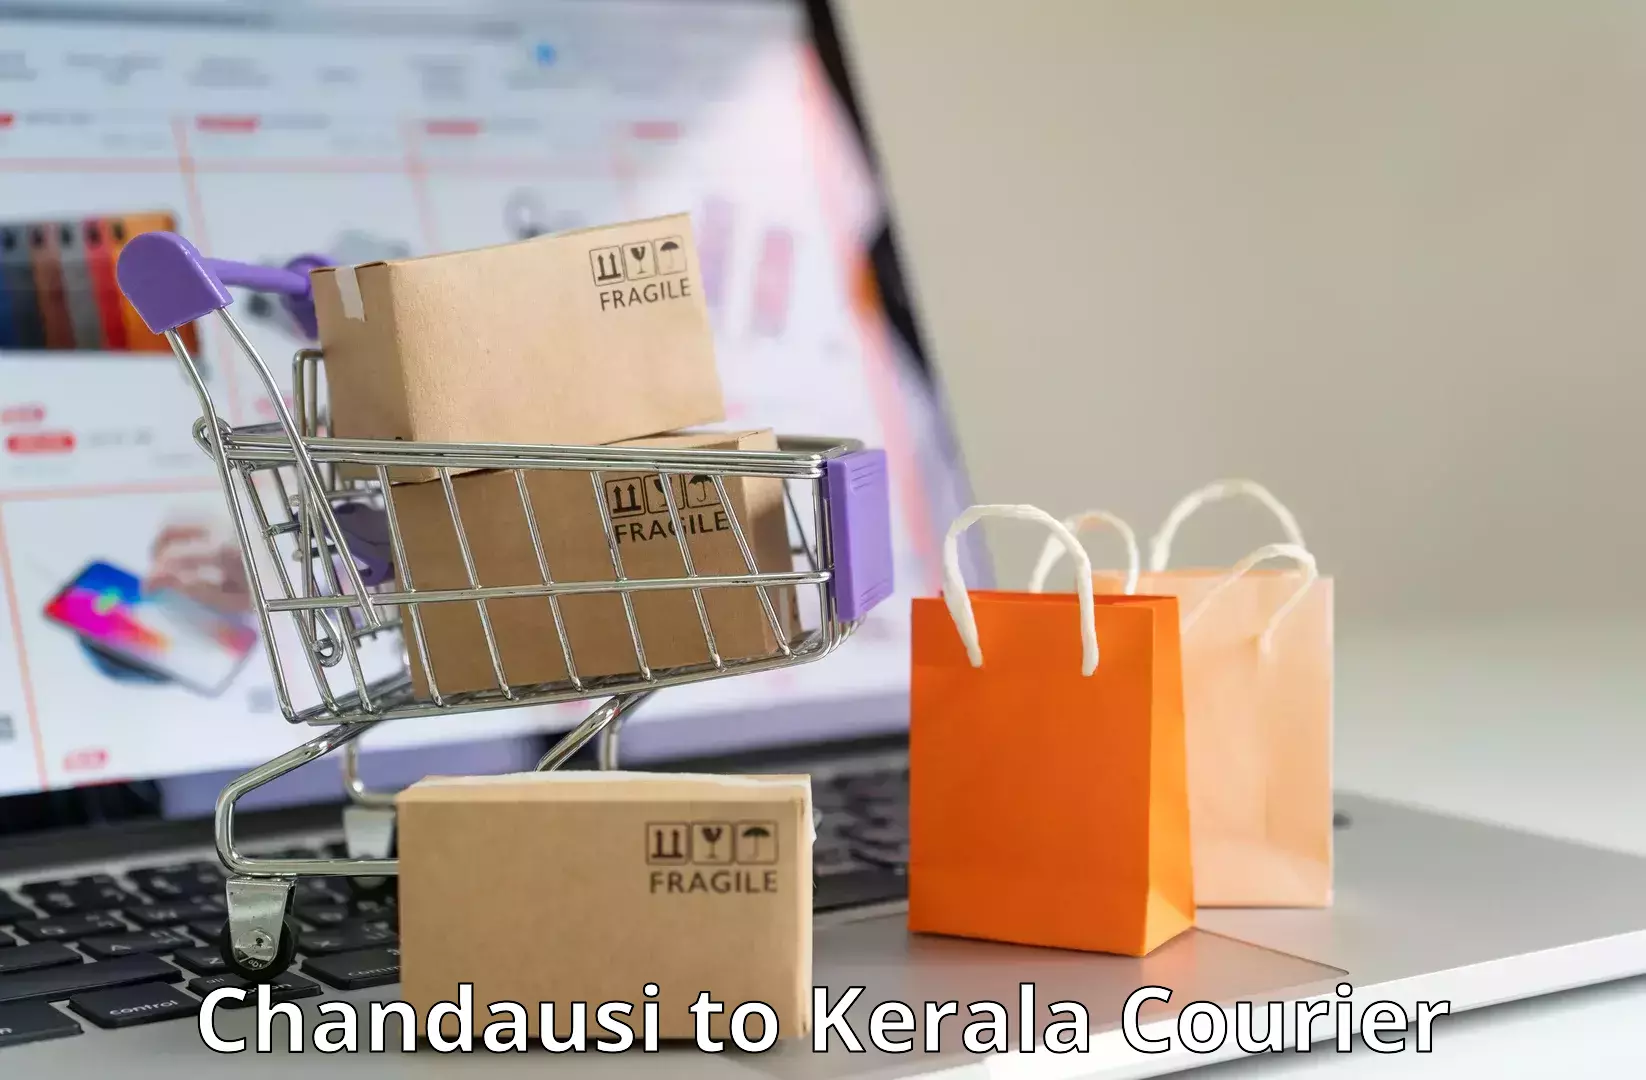 State-of-the-art courier technology Chandausi to Nilambur